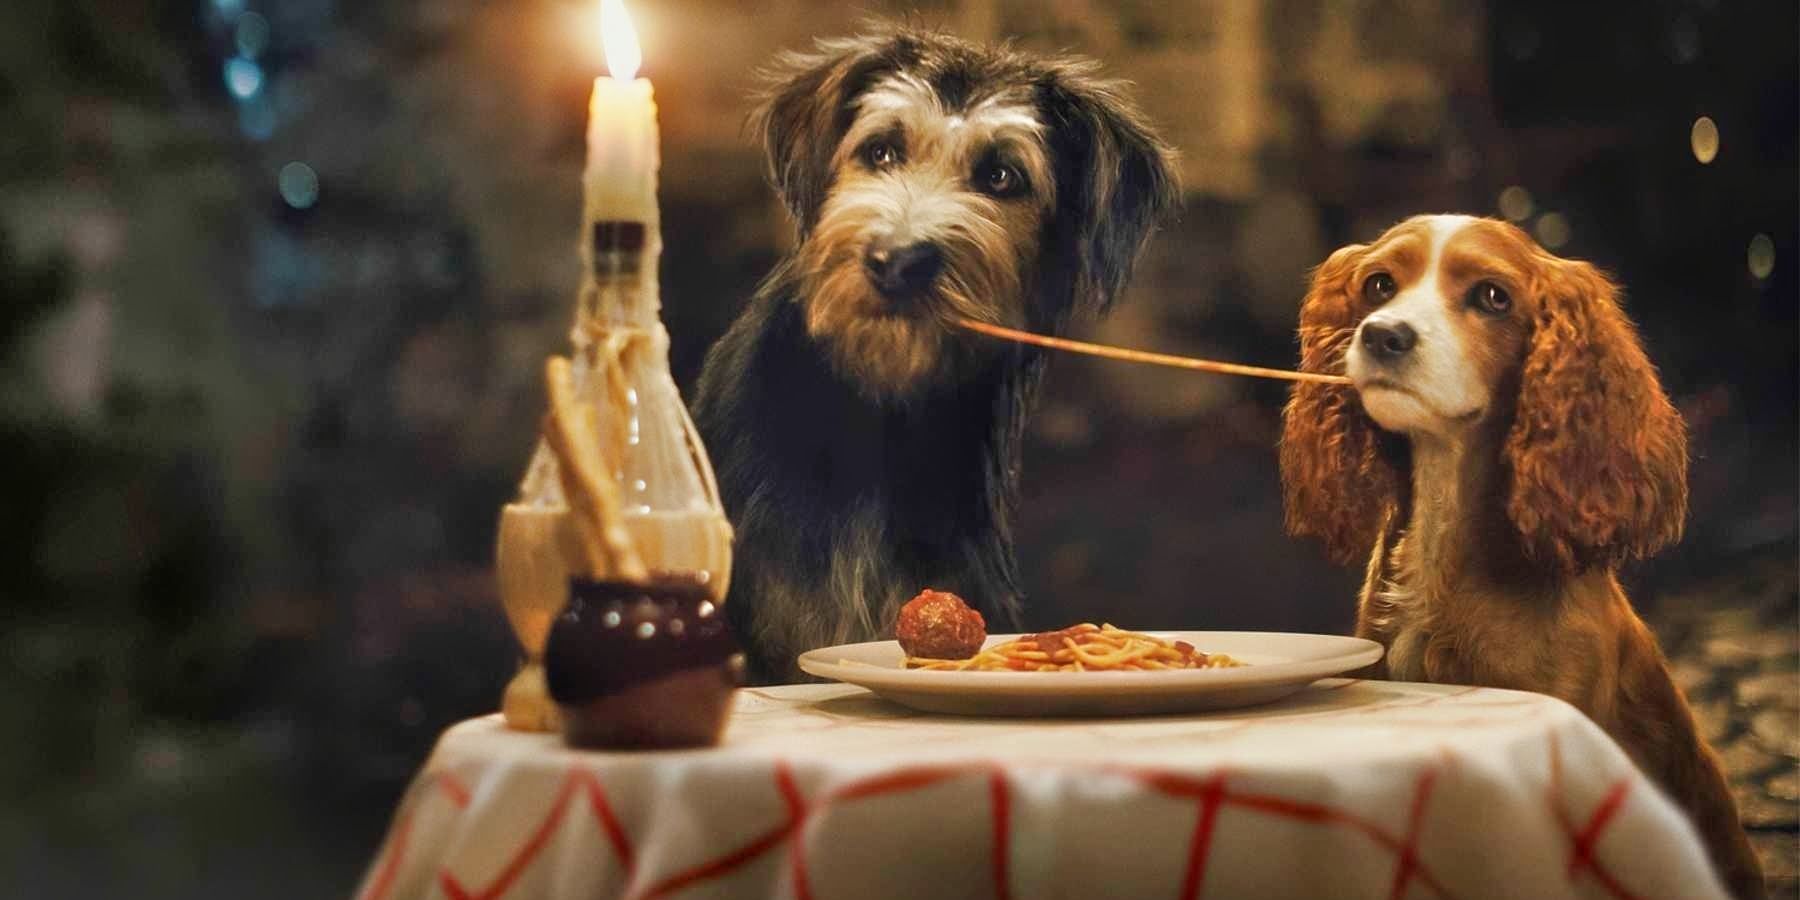 lady and the tramp live-action remake